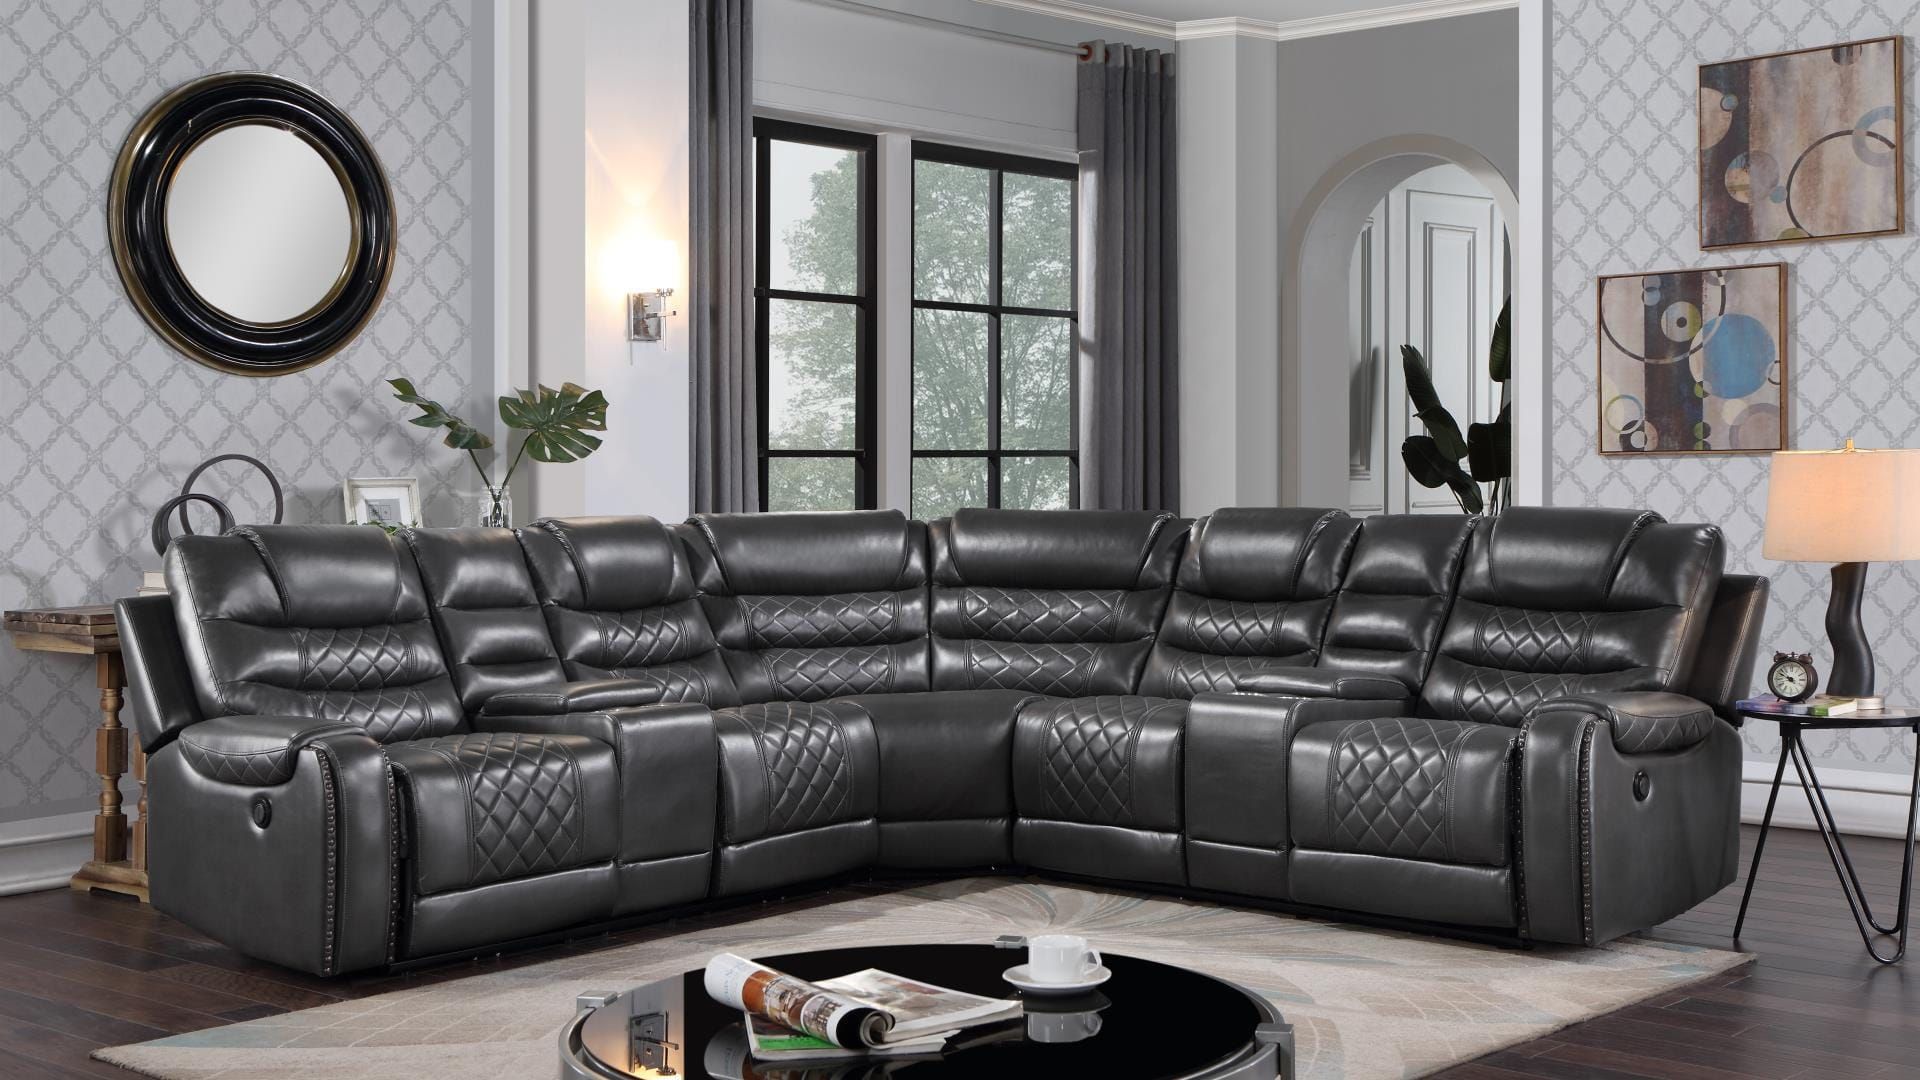 Tennesee Gray Faux Leather Sectional Sofagalaxy Furniture Pertaining To Faux Leather Sectional Sofa Sets (View 10 of 15)